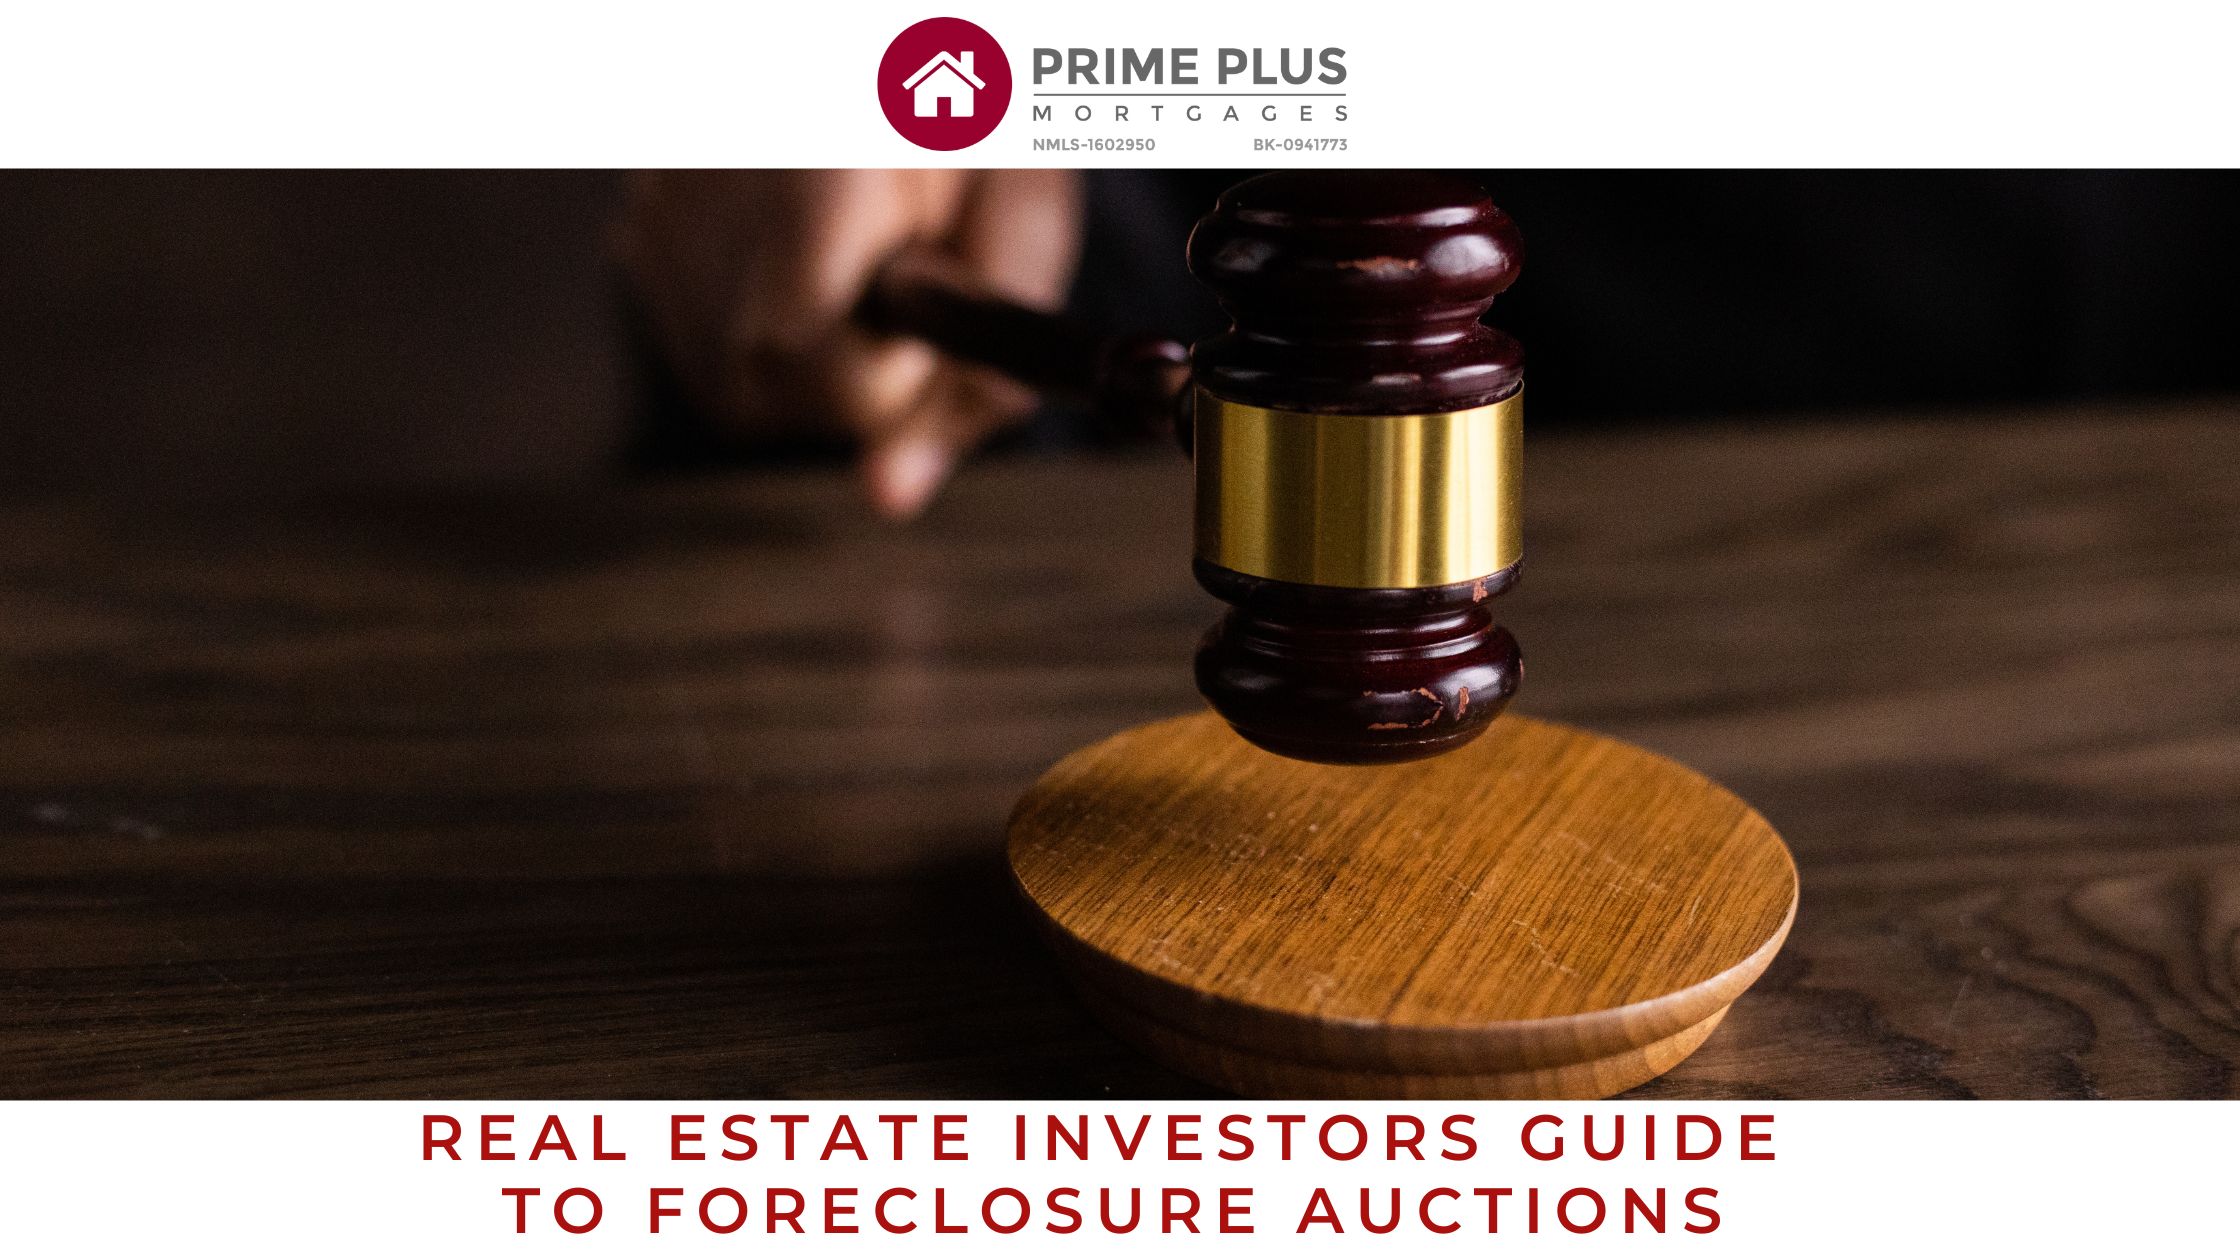 Real Estate Investors Guide to Foreclosure Auctions